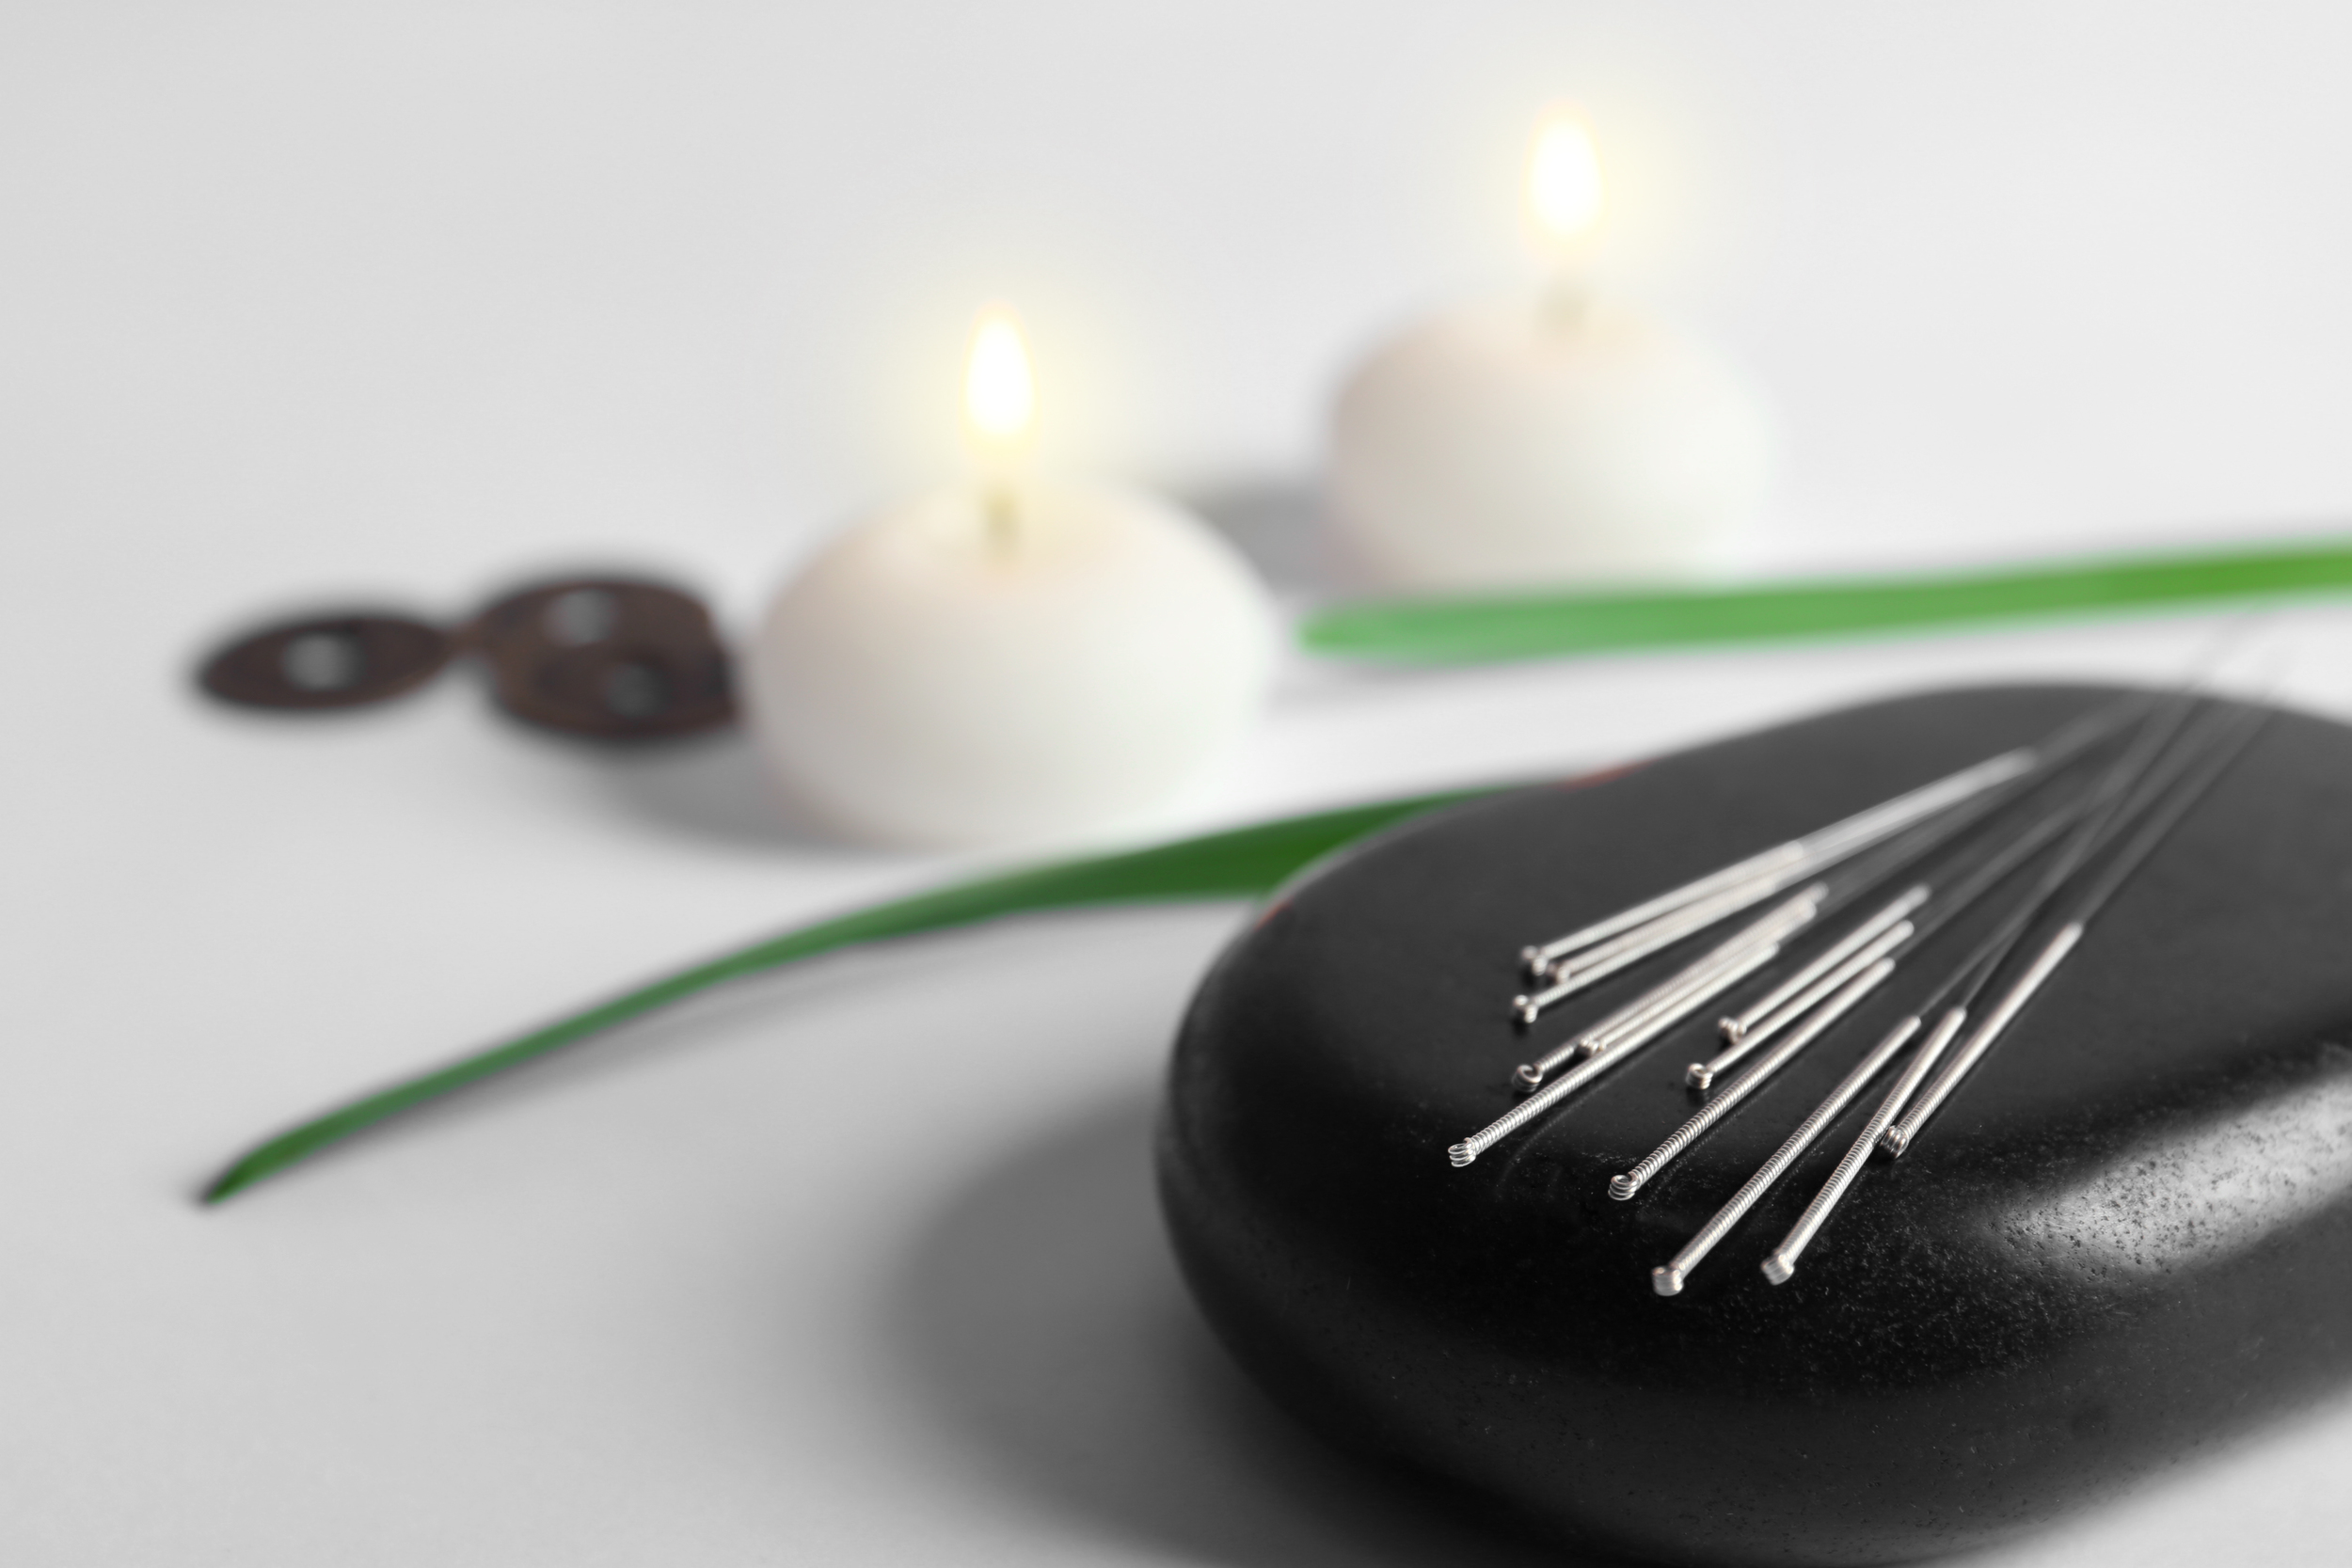 Acupuncture Needles Used In Traditional Chinese Medicine